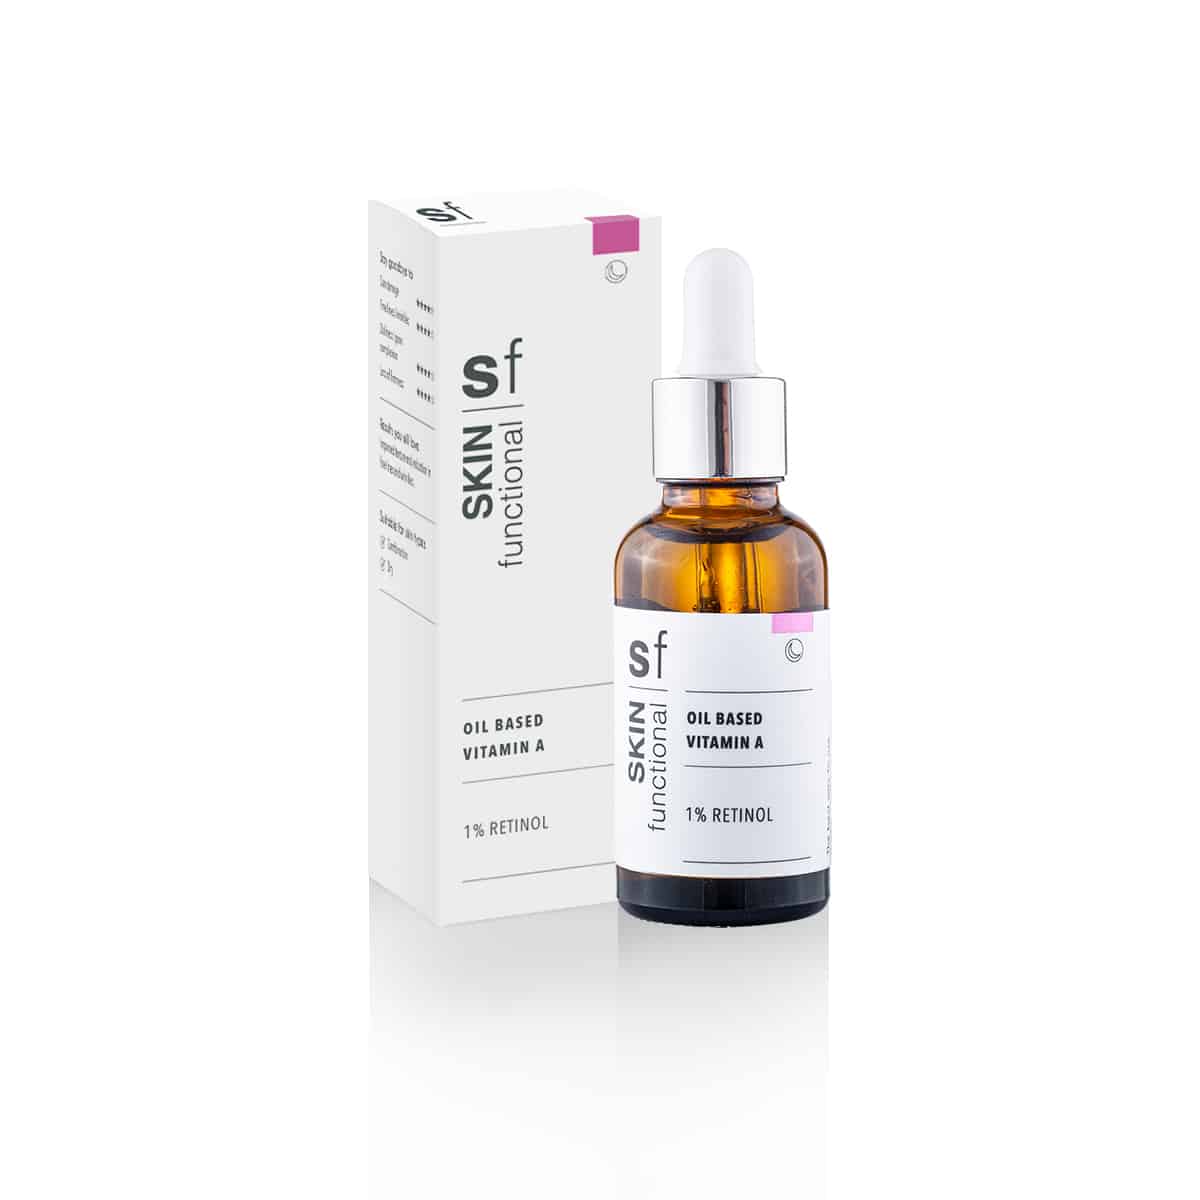 A bottle of SKIN Functional - 1% Retinol - Oil Based Vitamin A serum on a white background.